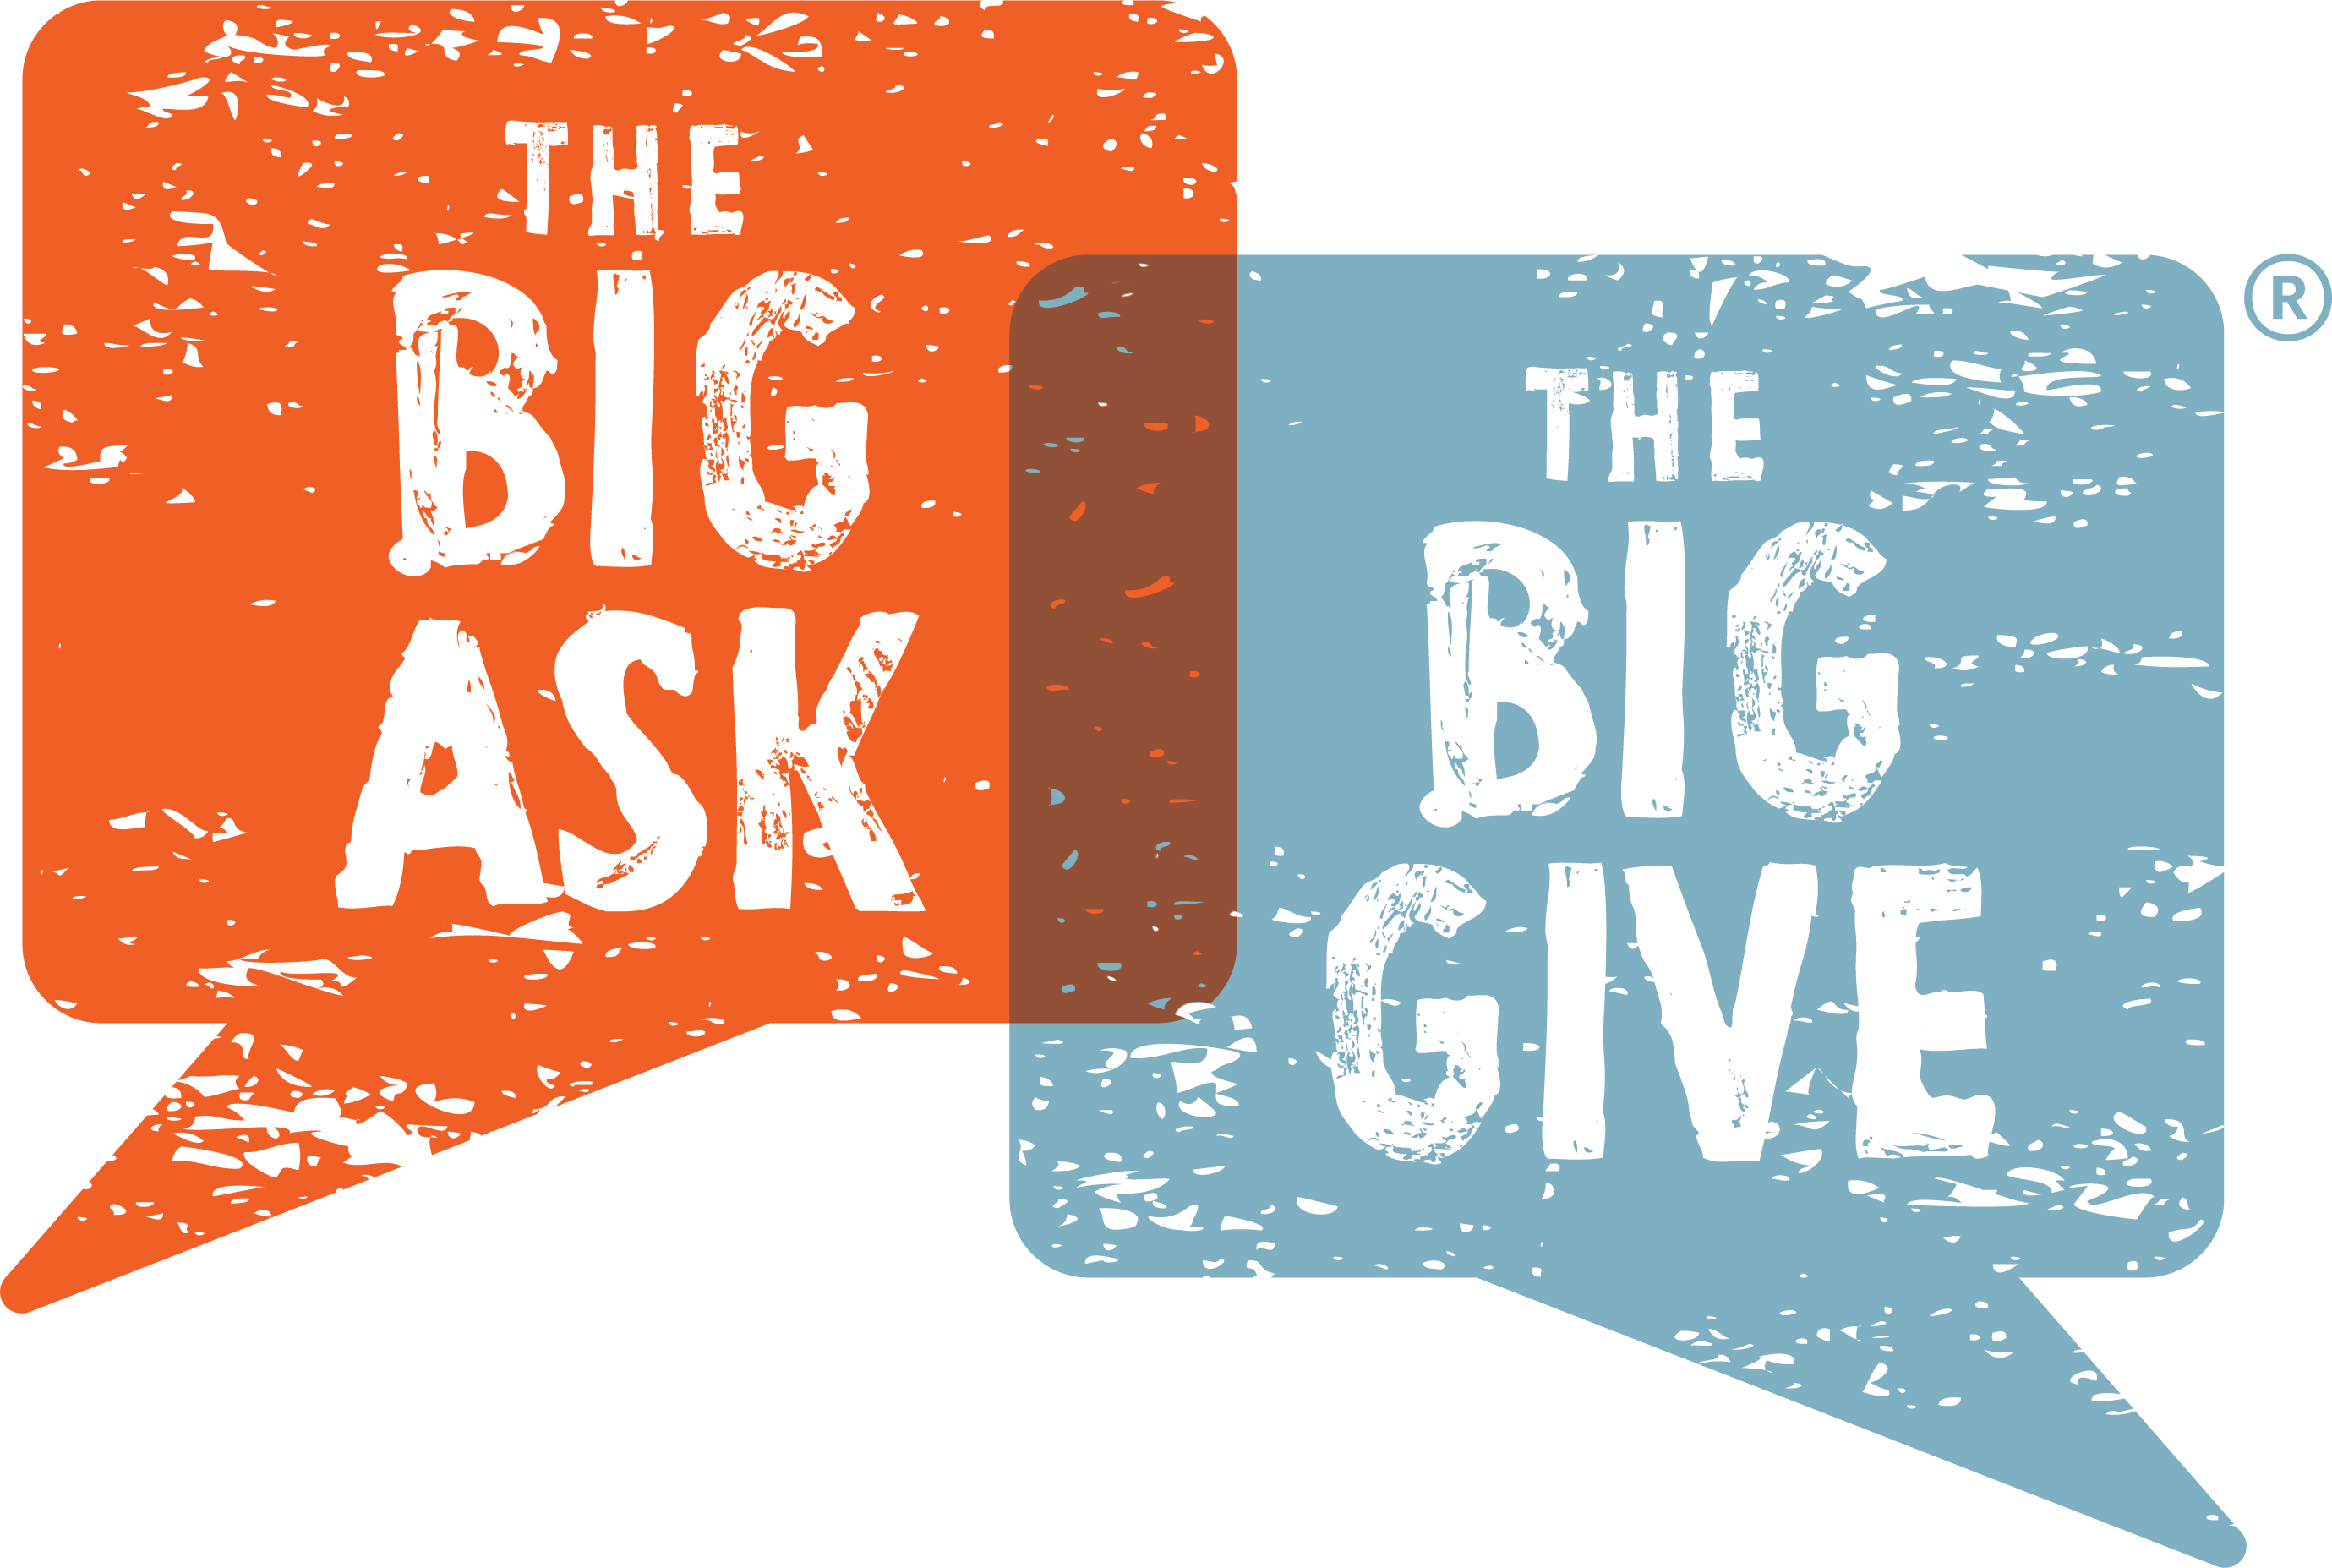 The Big Ask: The Big Give